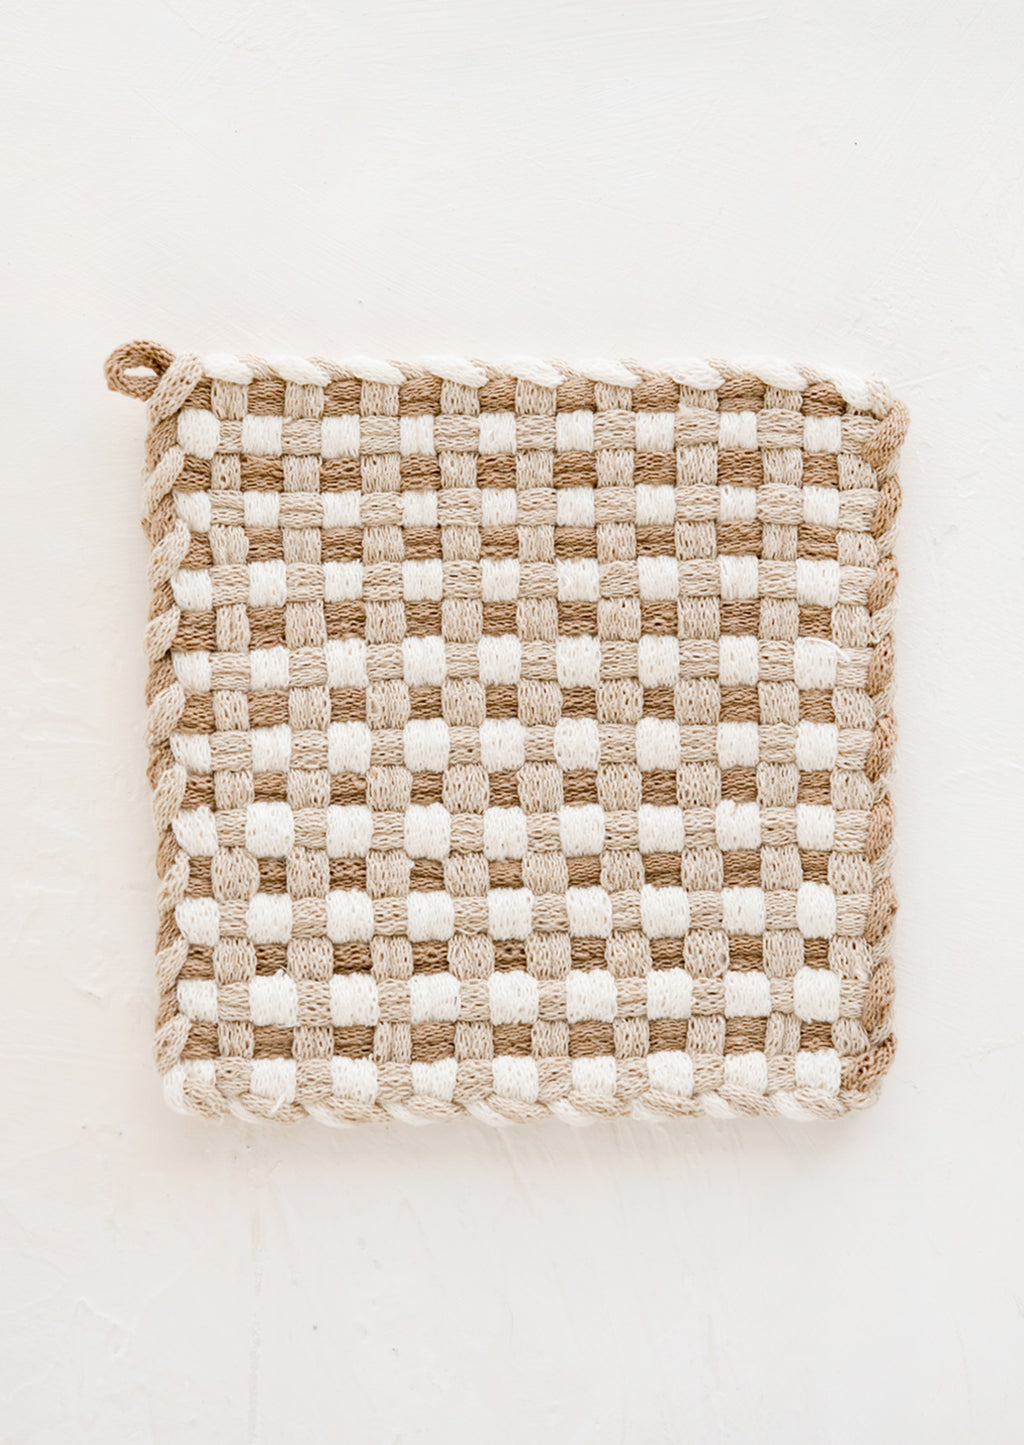 Ivory / Tan / Taupe: A hand-knit potholder in checkered weave of ivory, taupe and tan..